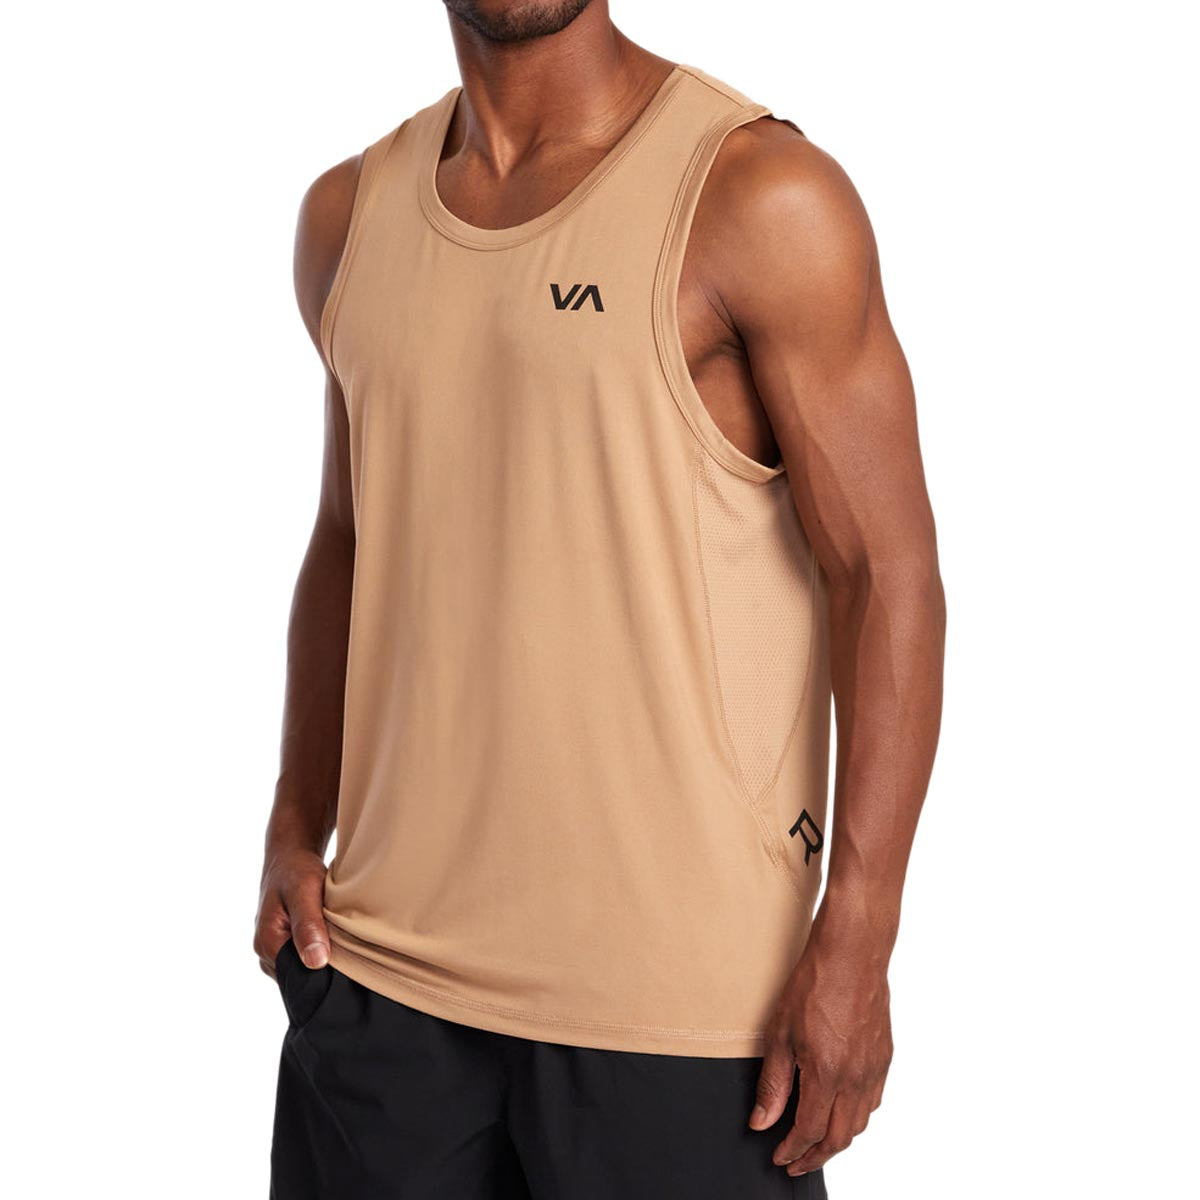 RVCA Sport Vent Sleeve Tank Top - Earth Clay image 2